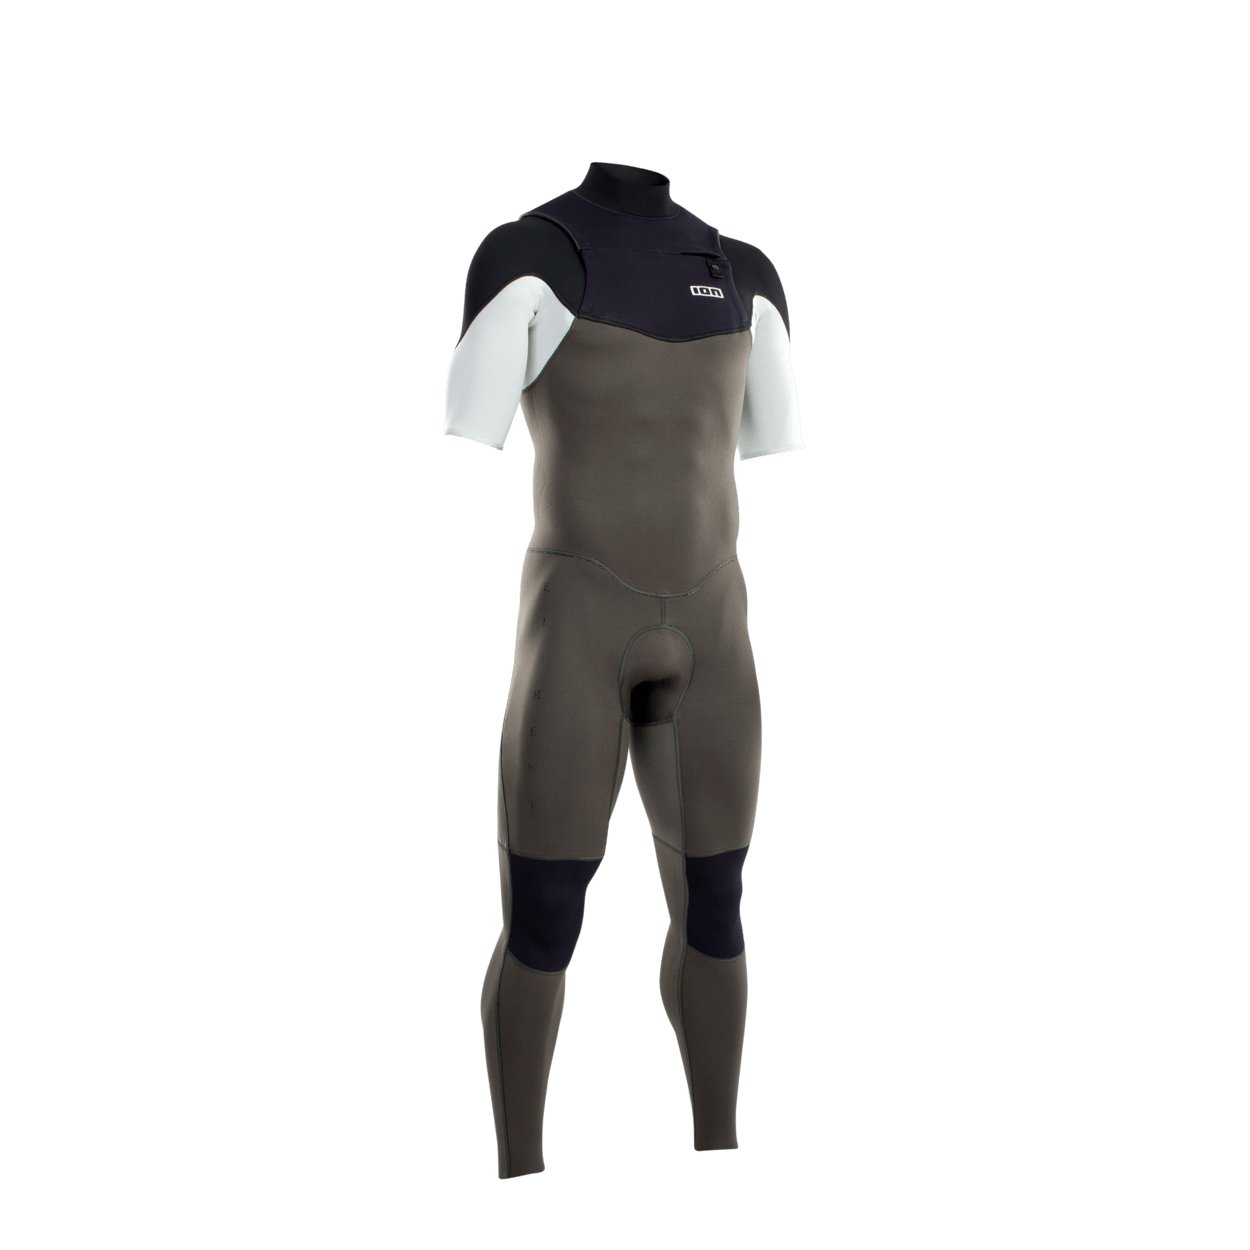 ION Men Wetsuit Element 2/2 Shortsleeve Front Zip 2022 - Worthing Watersports - 9008415950911 - Wetsuits - ION Water